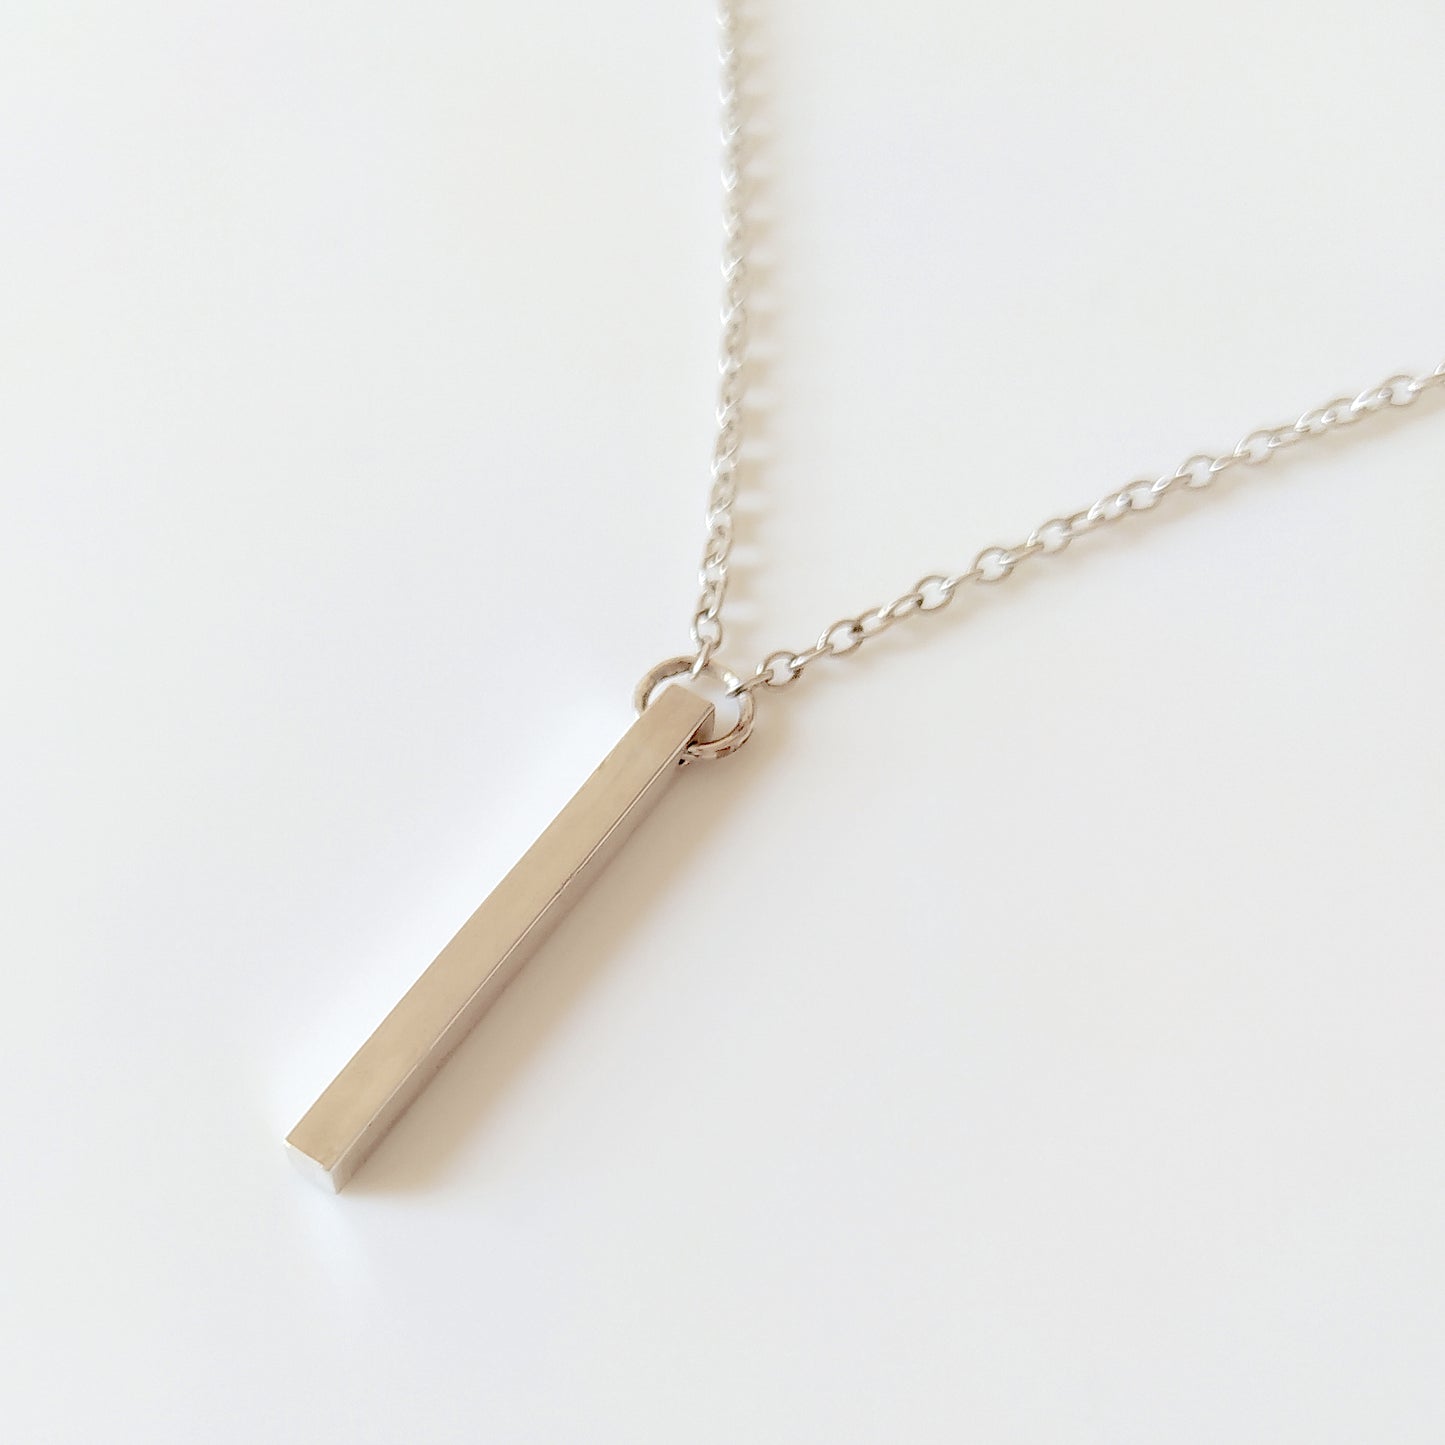 Adrian | dainty silver necklace with bar pendant